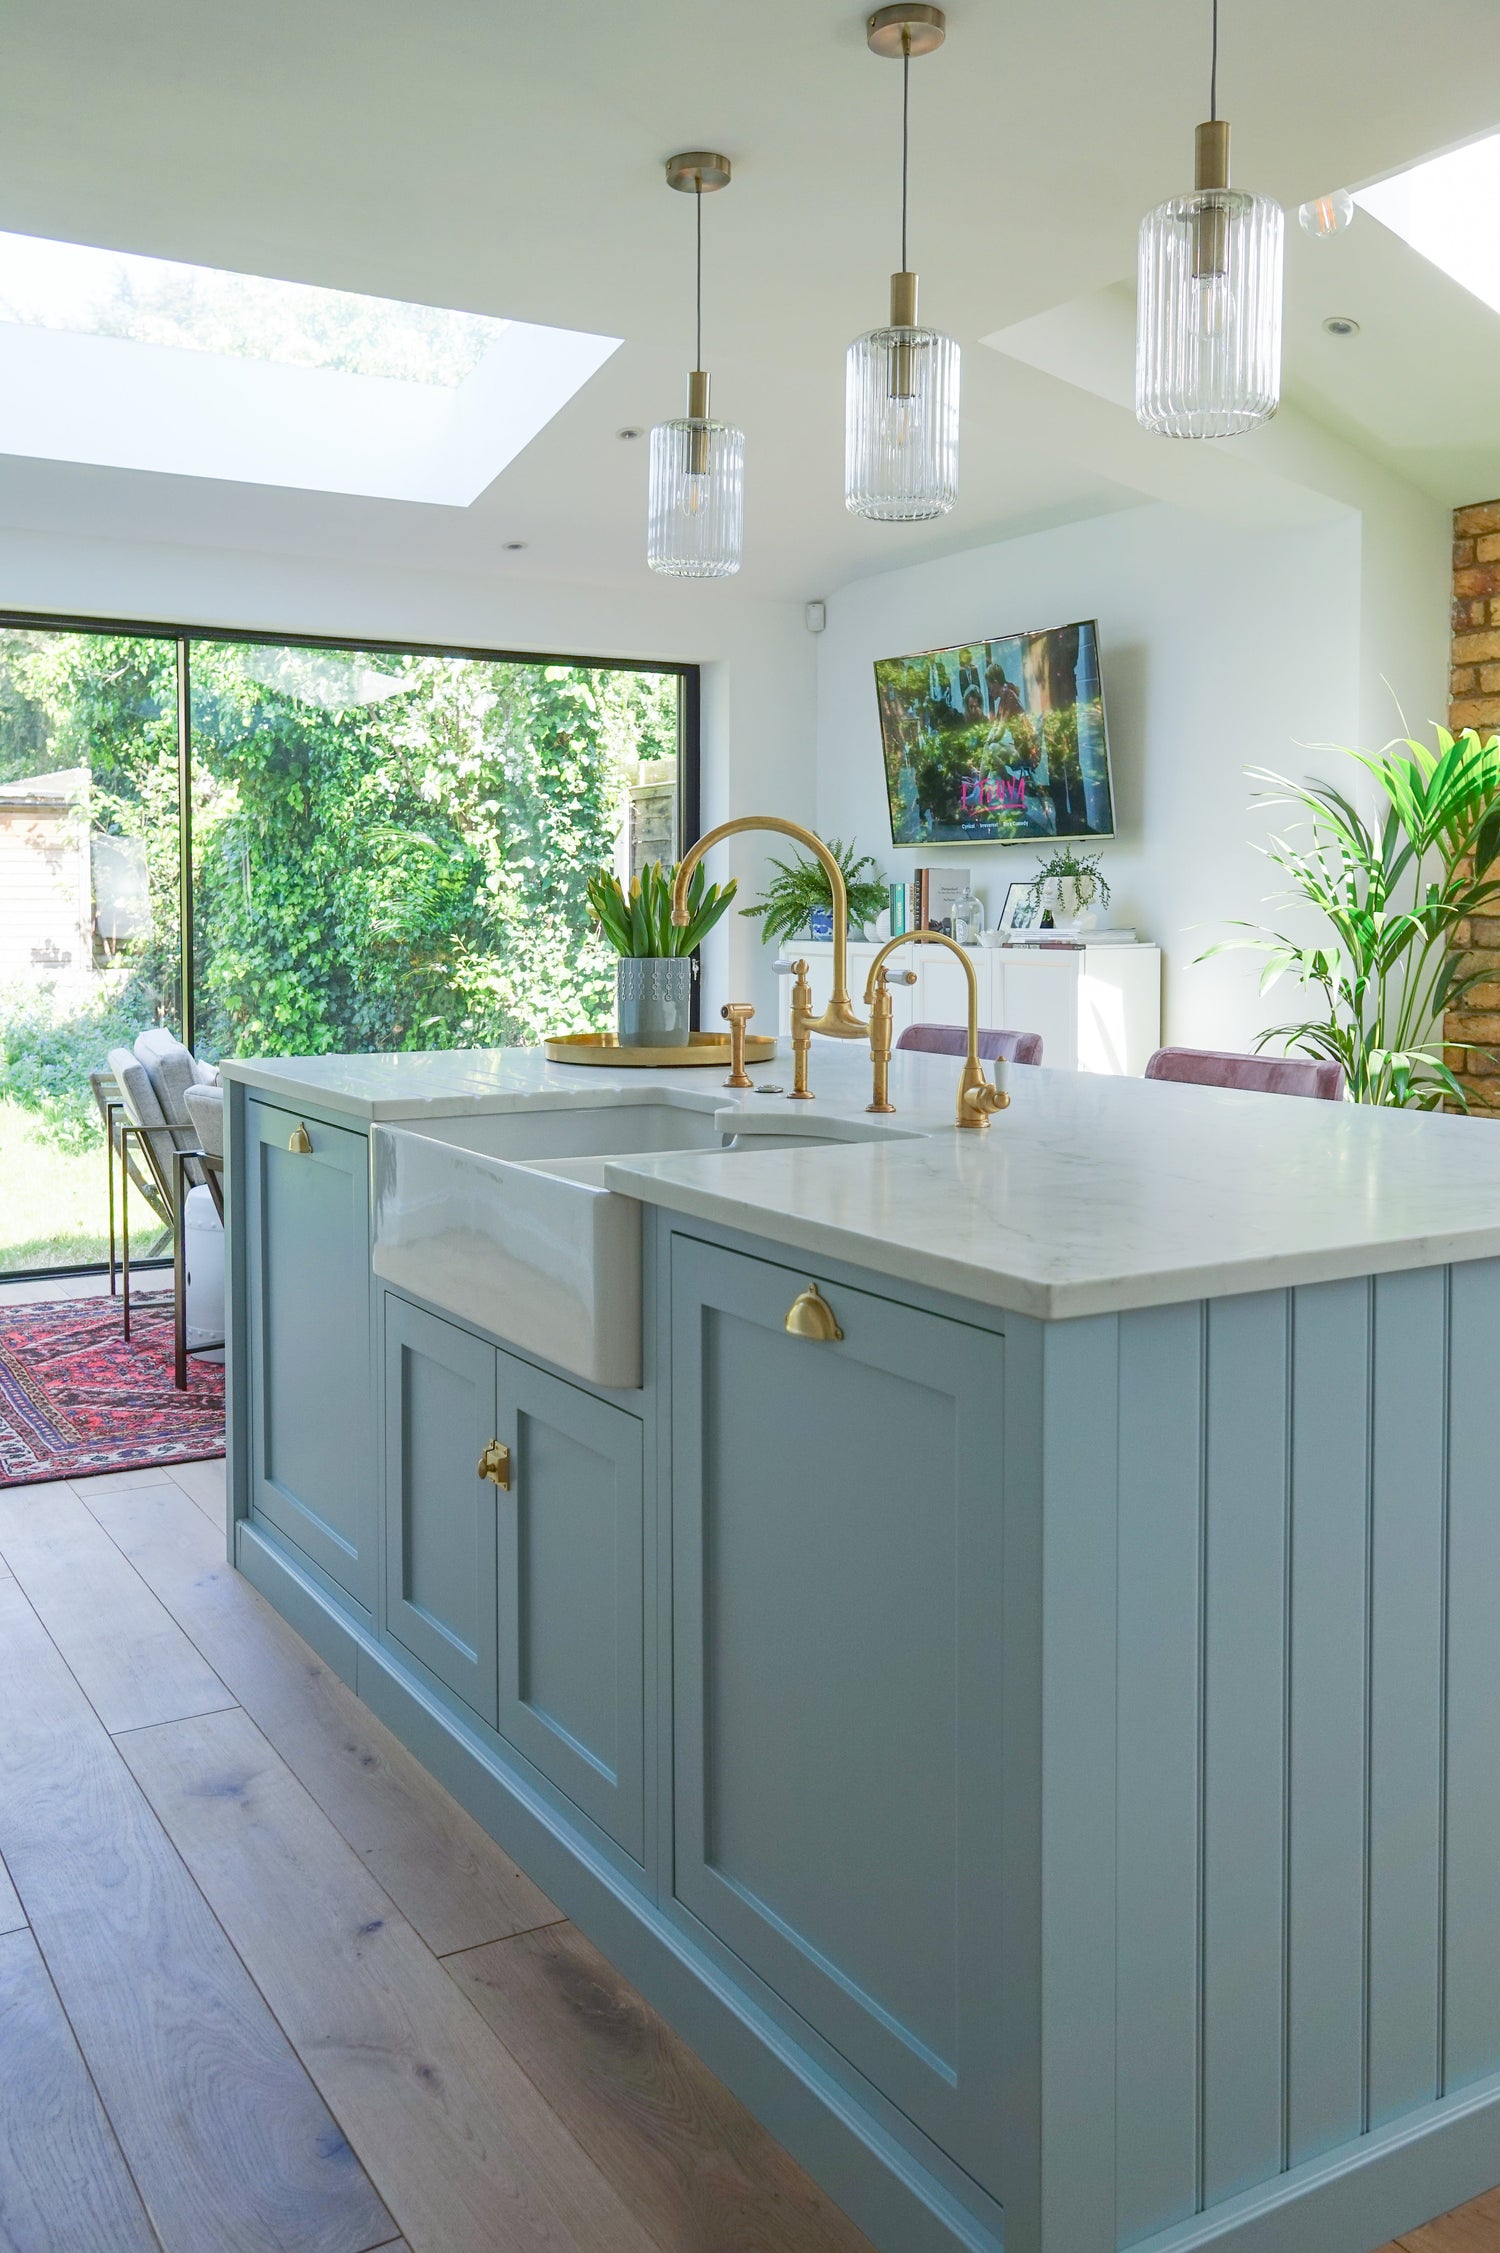 Renovations We Love: The London Home Fix